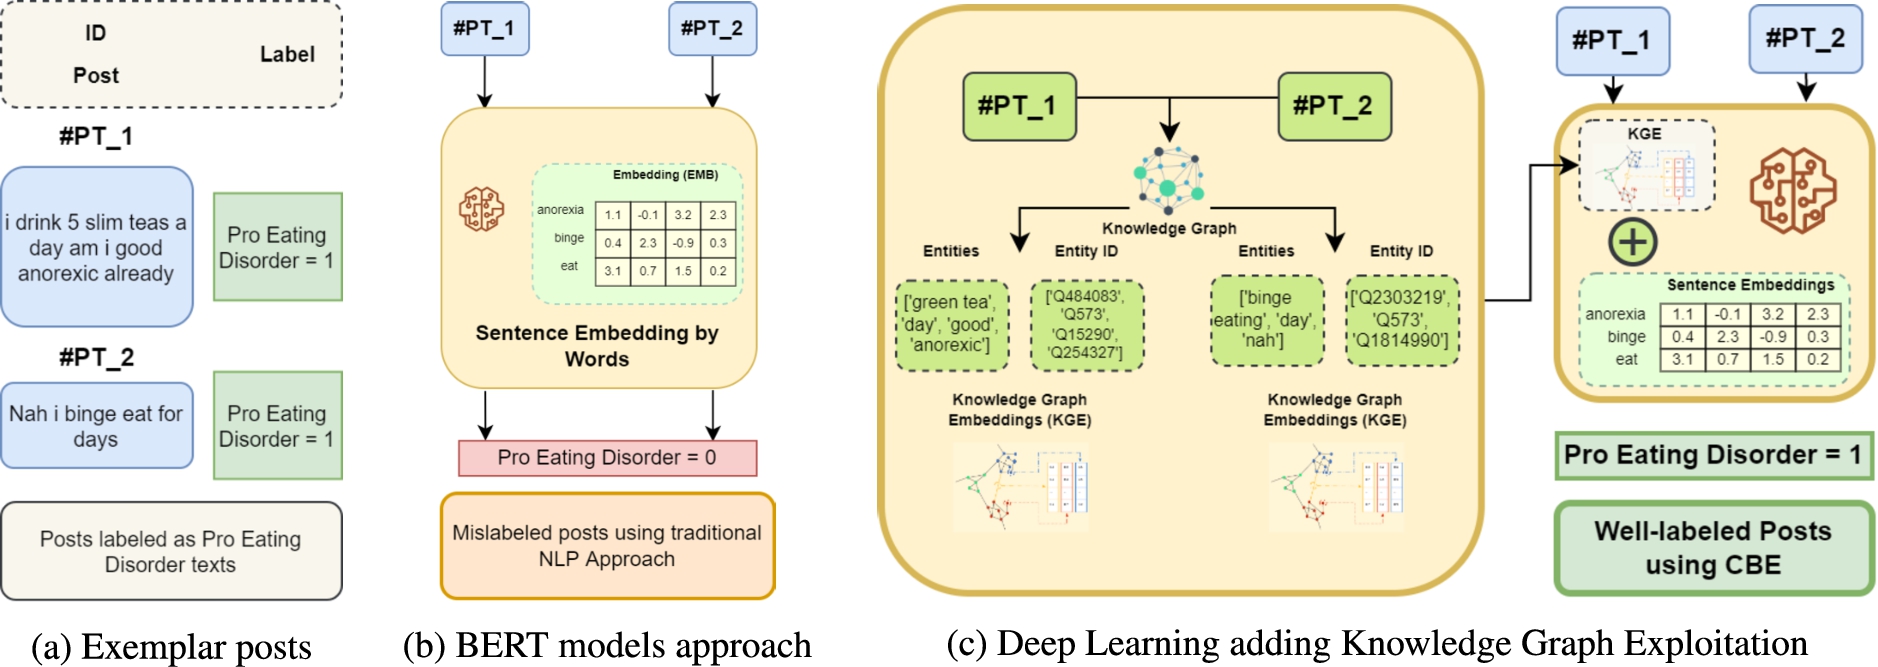 Motivating example. (a) 2 labeled posts, (b) a text classification model using BERT models approach, (c) short text classification using the novel approach making use of context-based embeddings (CBE).